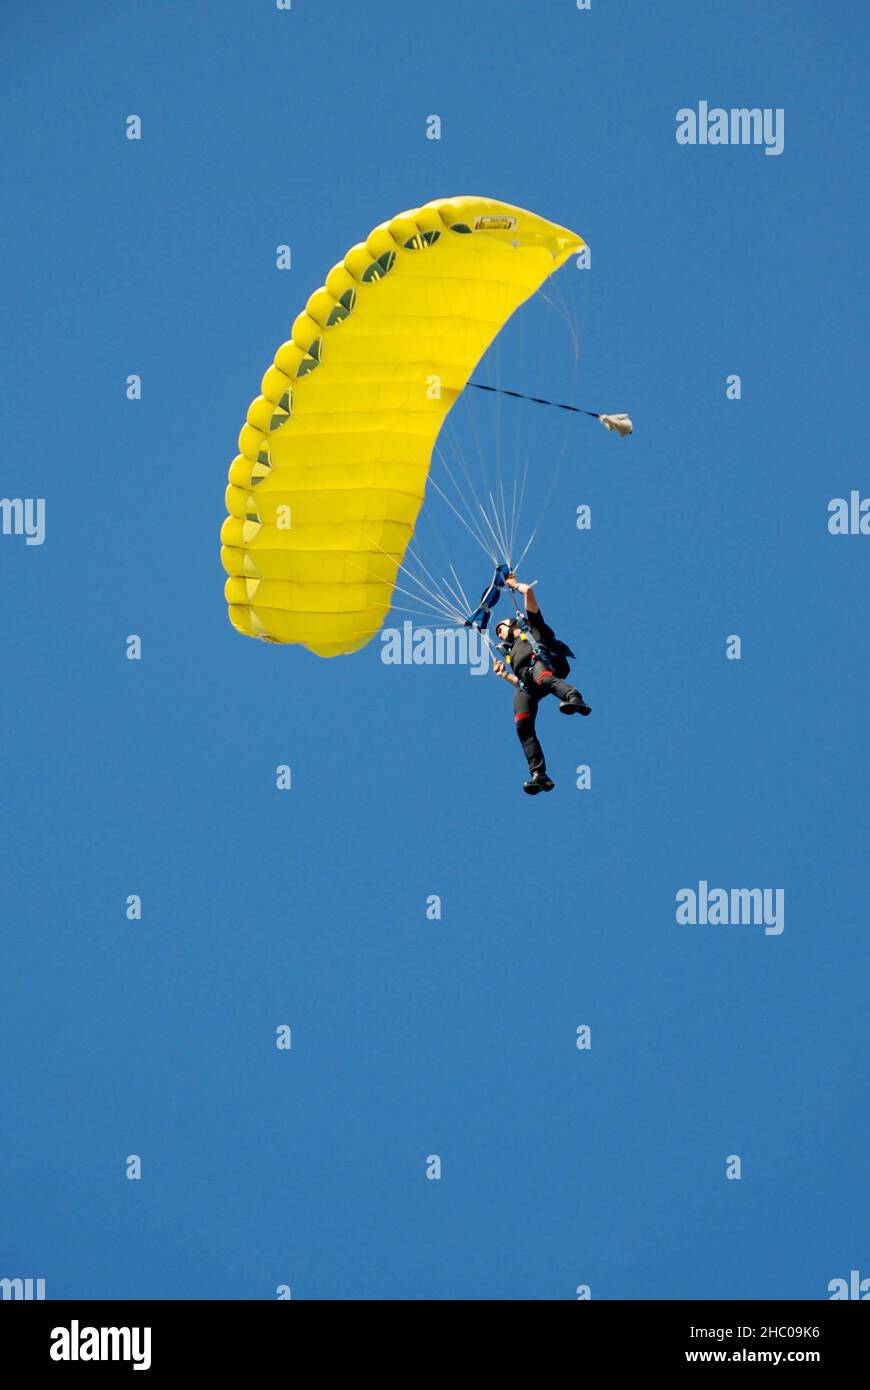 Builth Wells, Wales - July 2017: Skydiver with parachute about to land after a jump Stock Photo